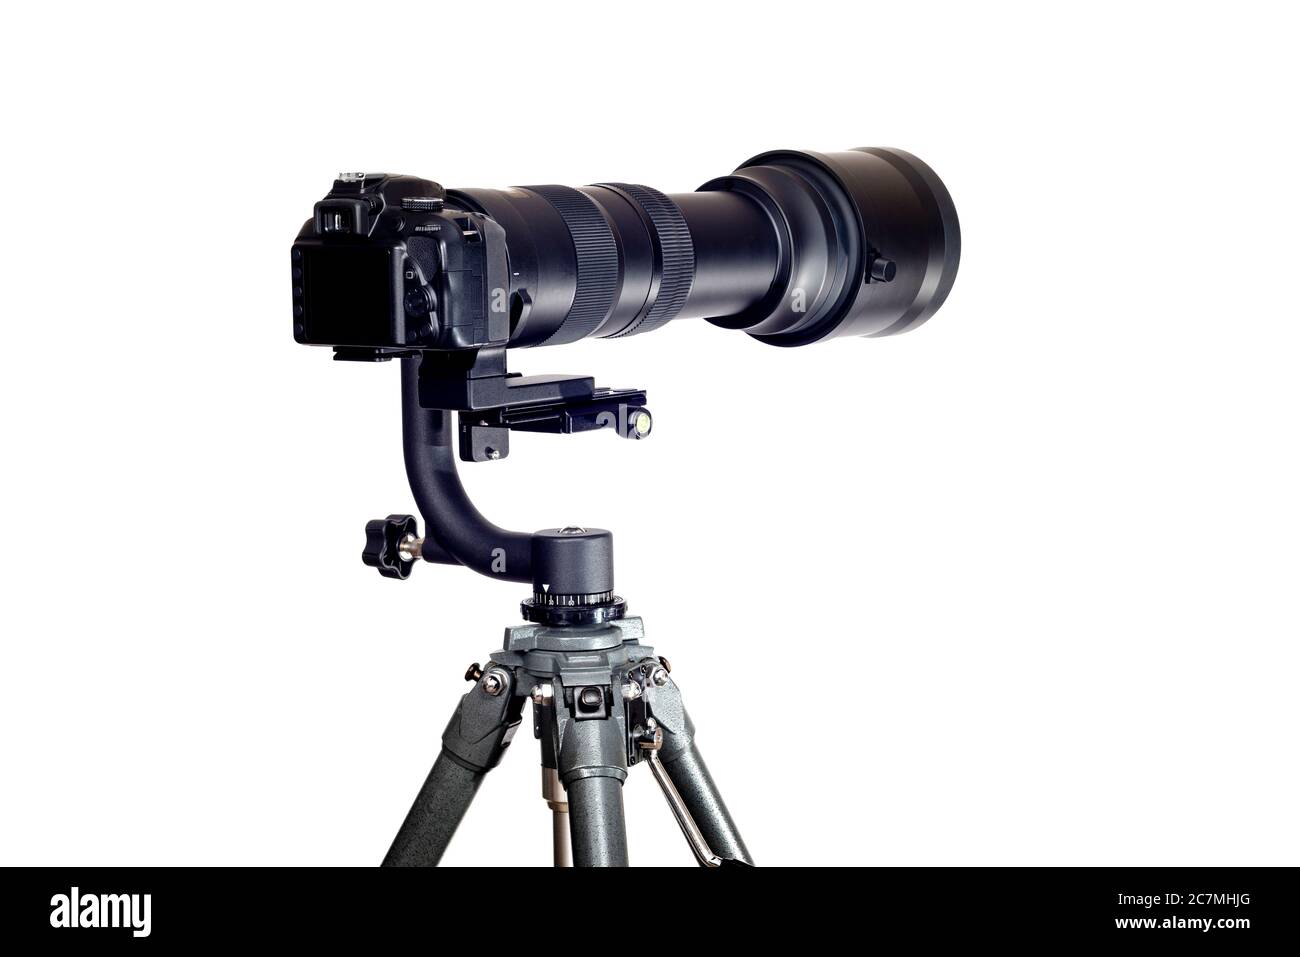 Horizontal shot of a Gimbal Tripod Head holding a digital camera with a long telephoto zoom lens on a white background. Stock Photo